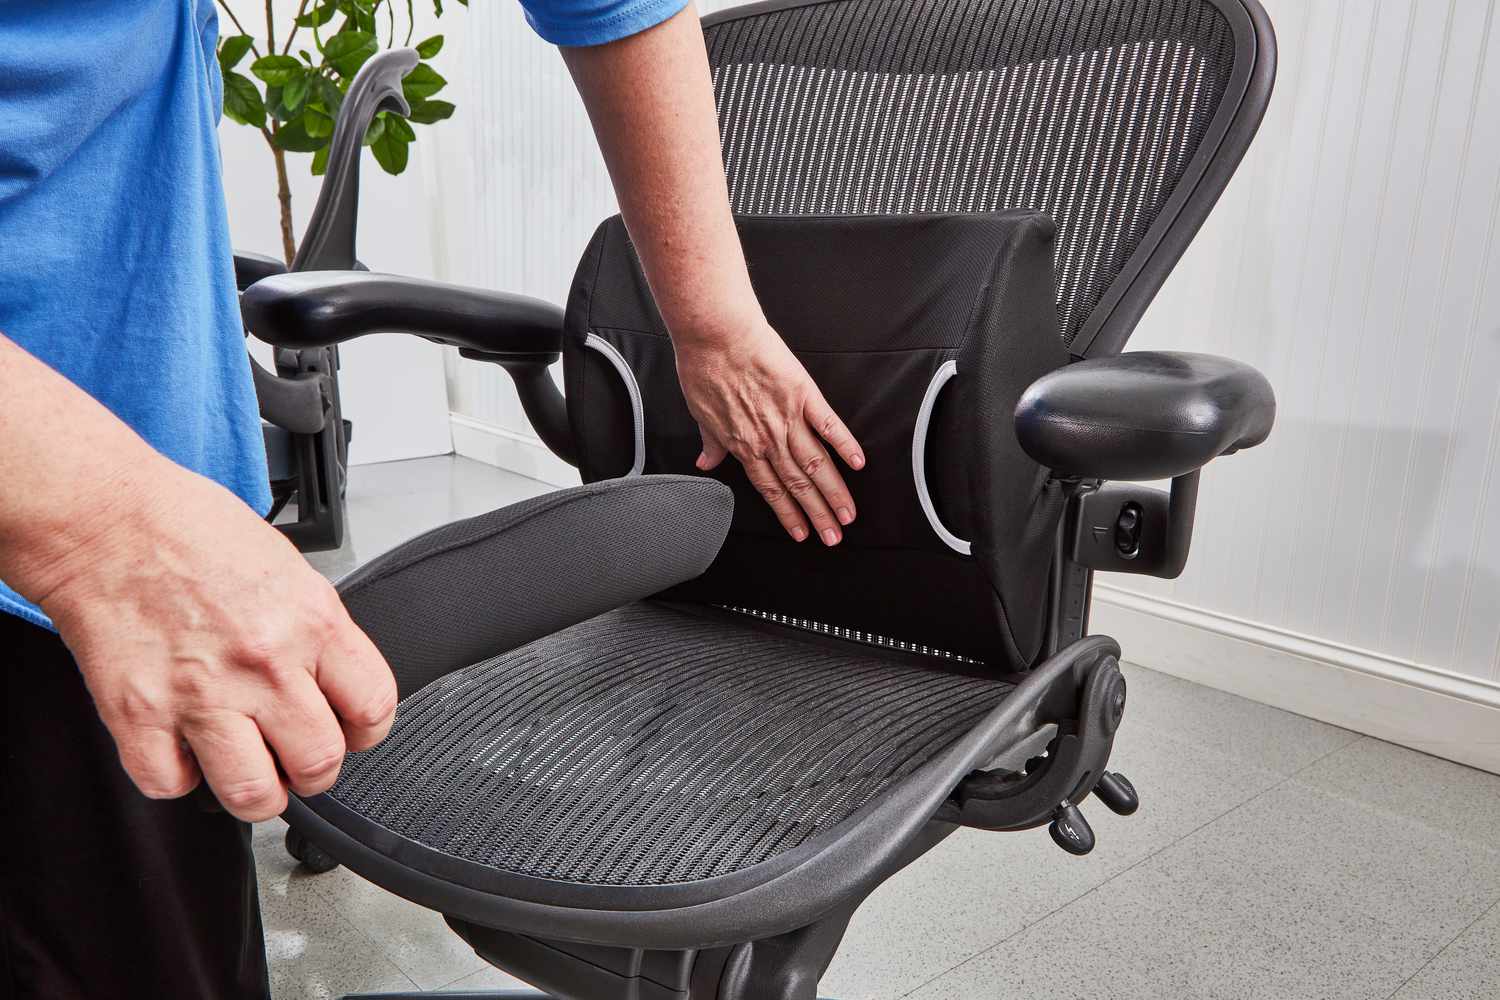 Top 10 Ergonomic Chairs for Back Pain Relief